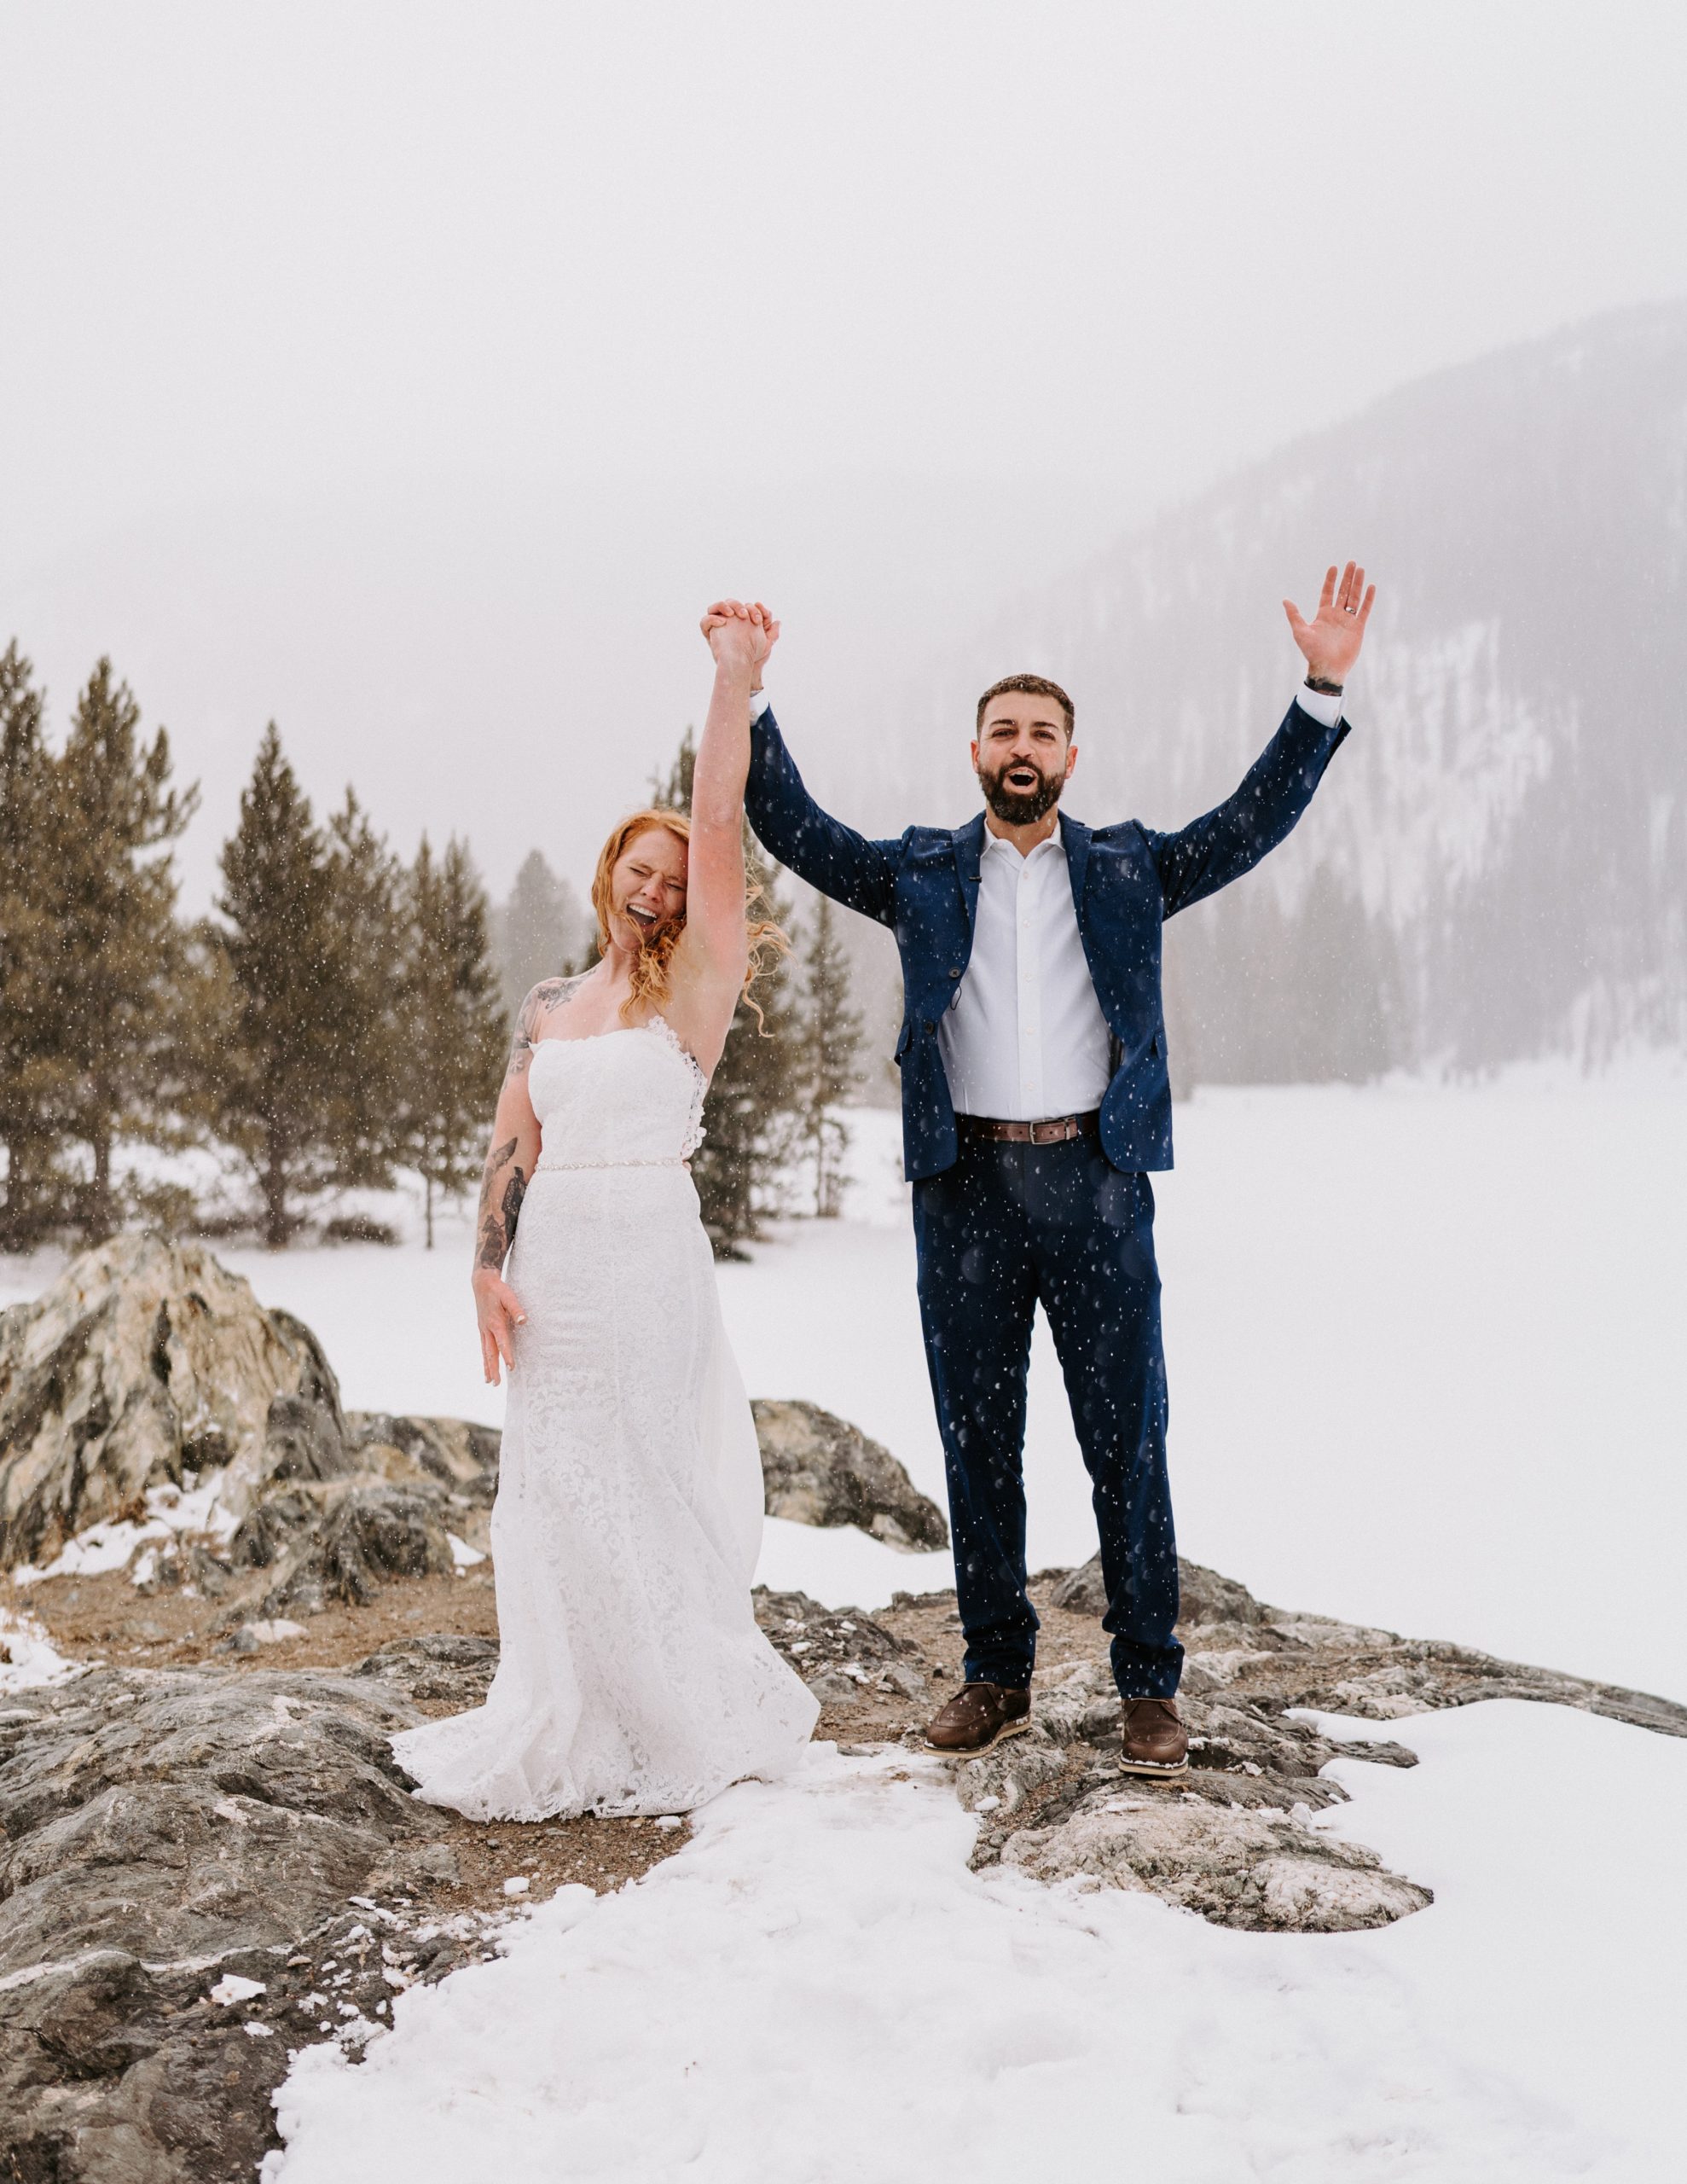 How to plan your Colorado elopement